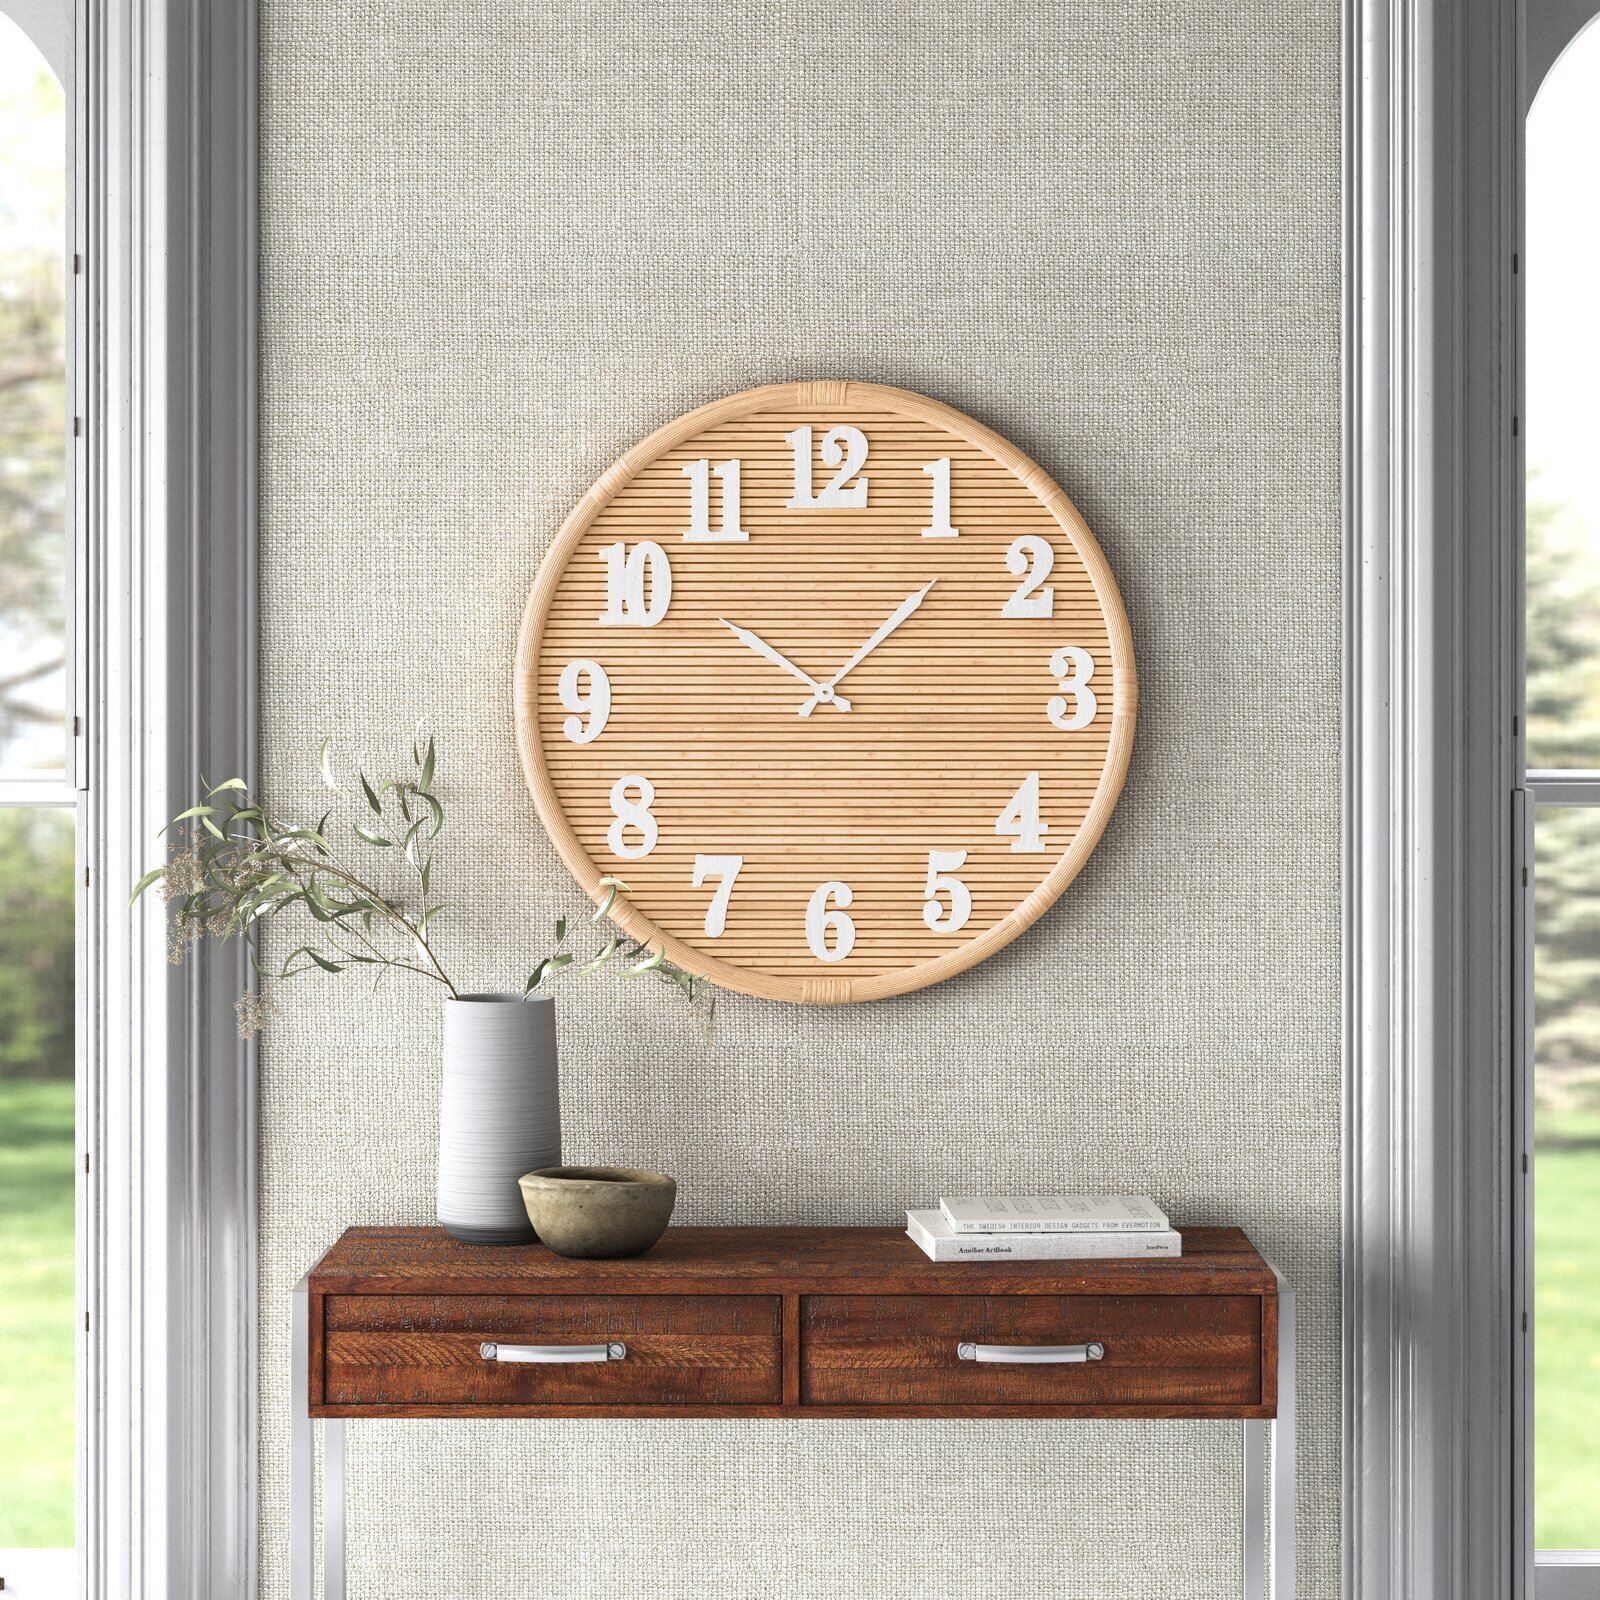 Large retro wall clock in a simple design